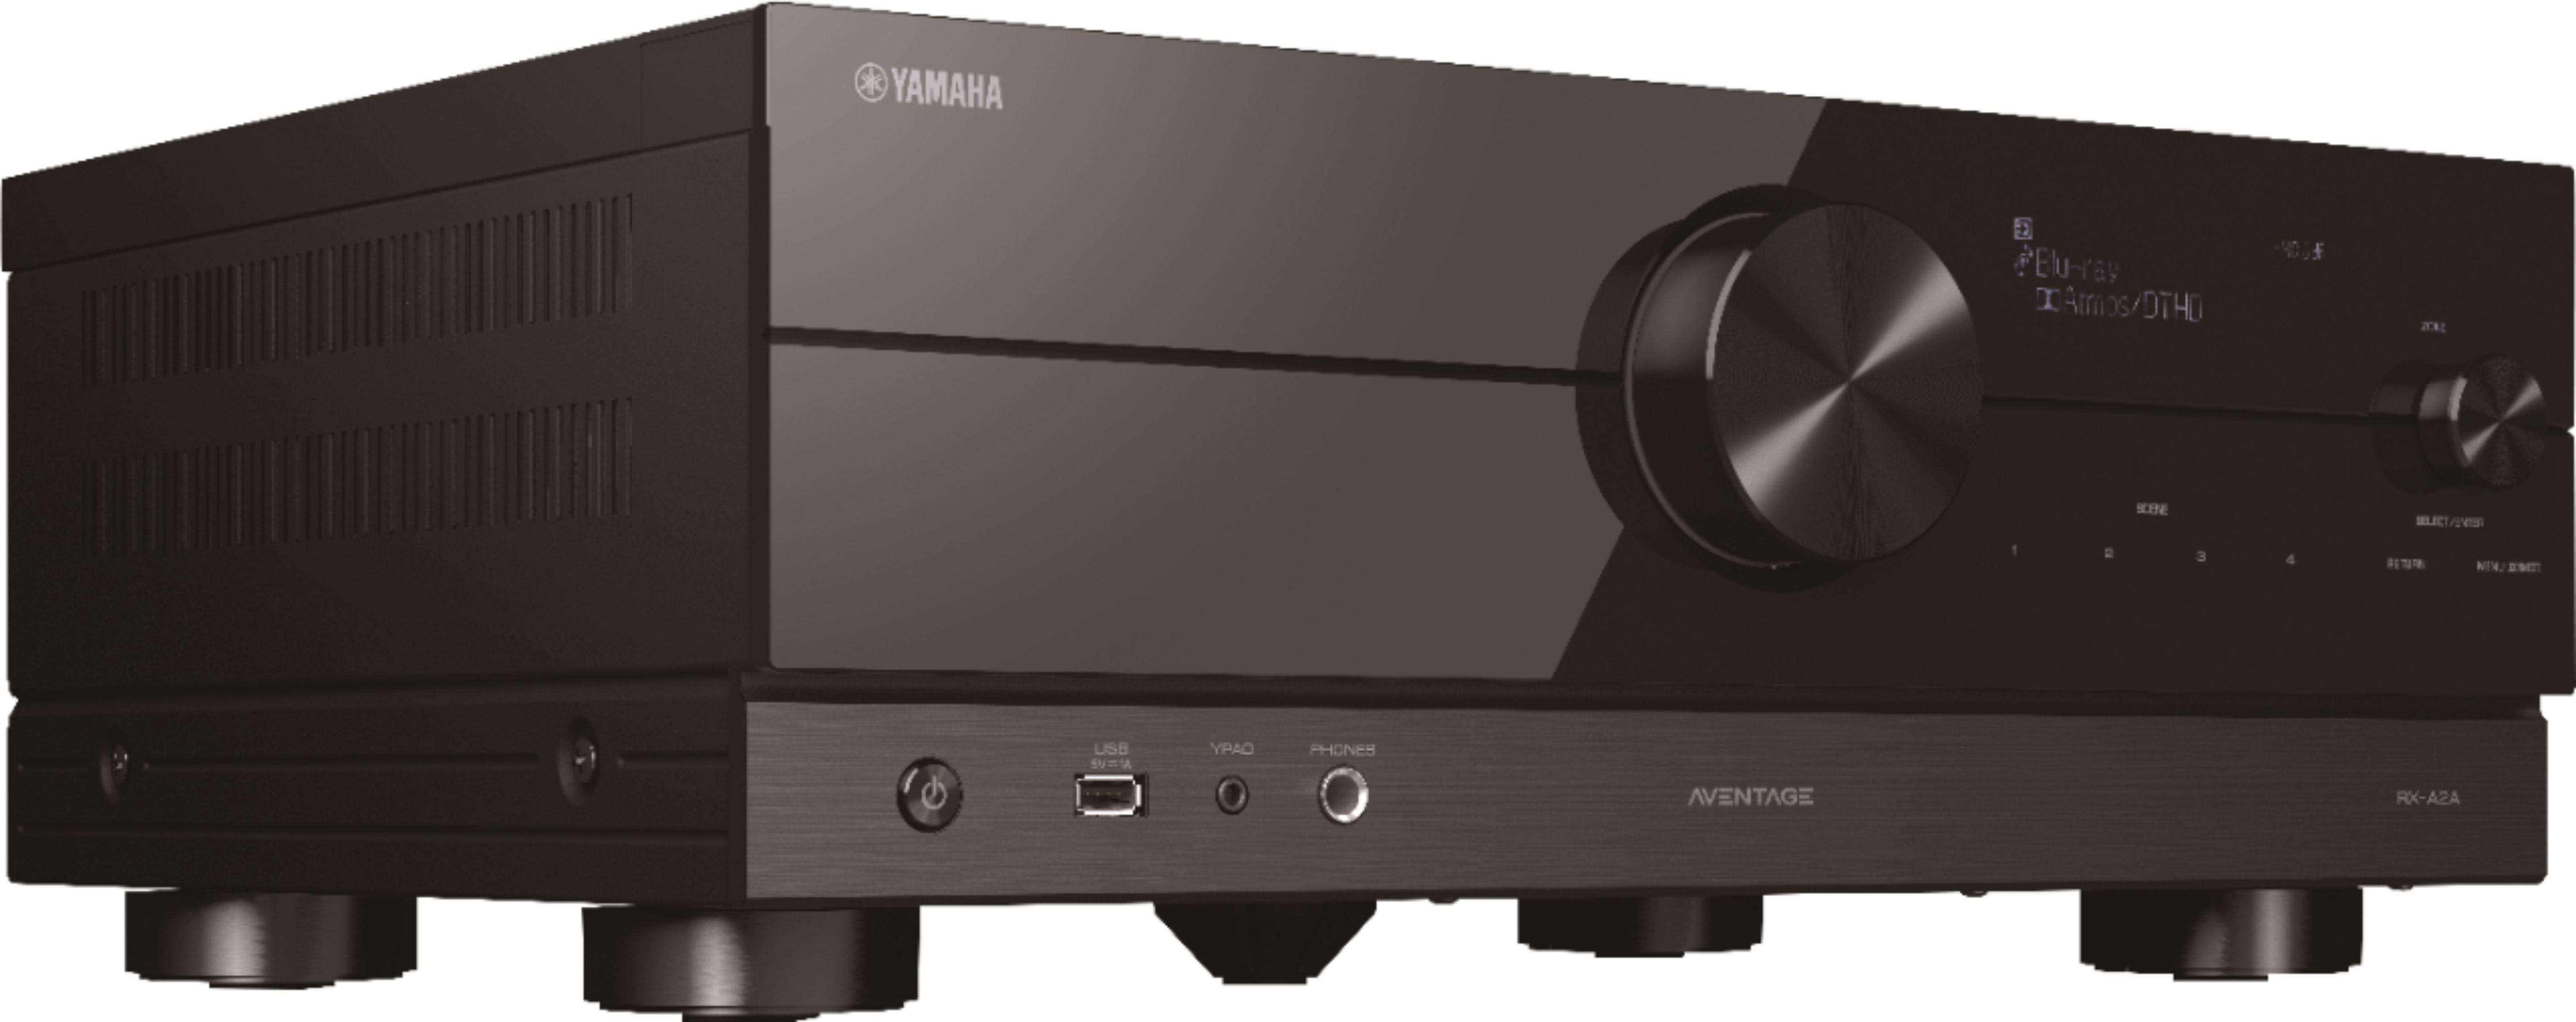 Yamaha AVENTAGE RX-A2A 100W 7.2-Channel AV Receiver with 8K HDMI